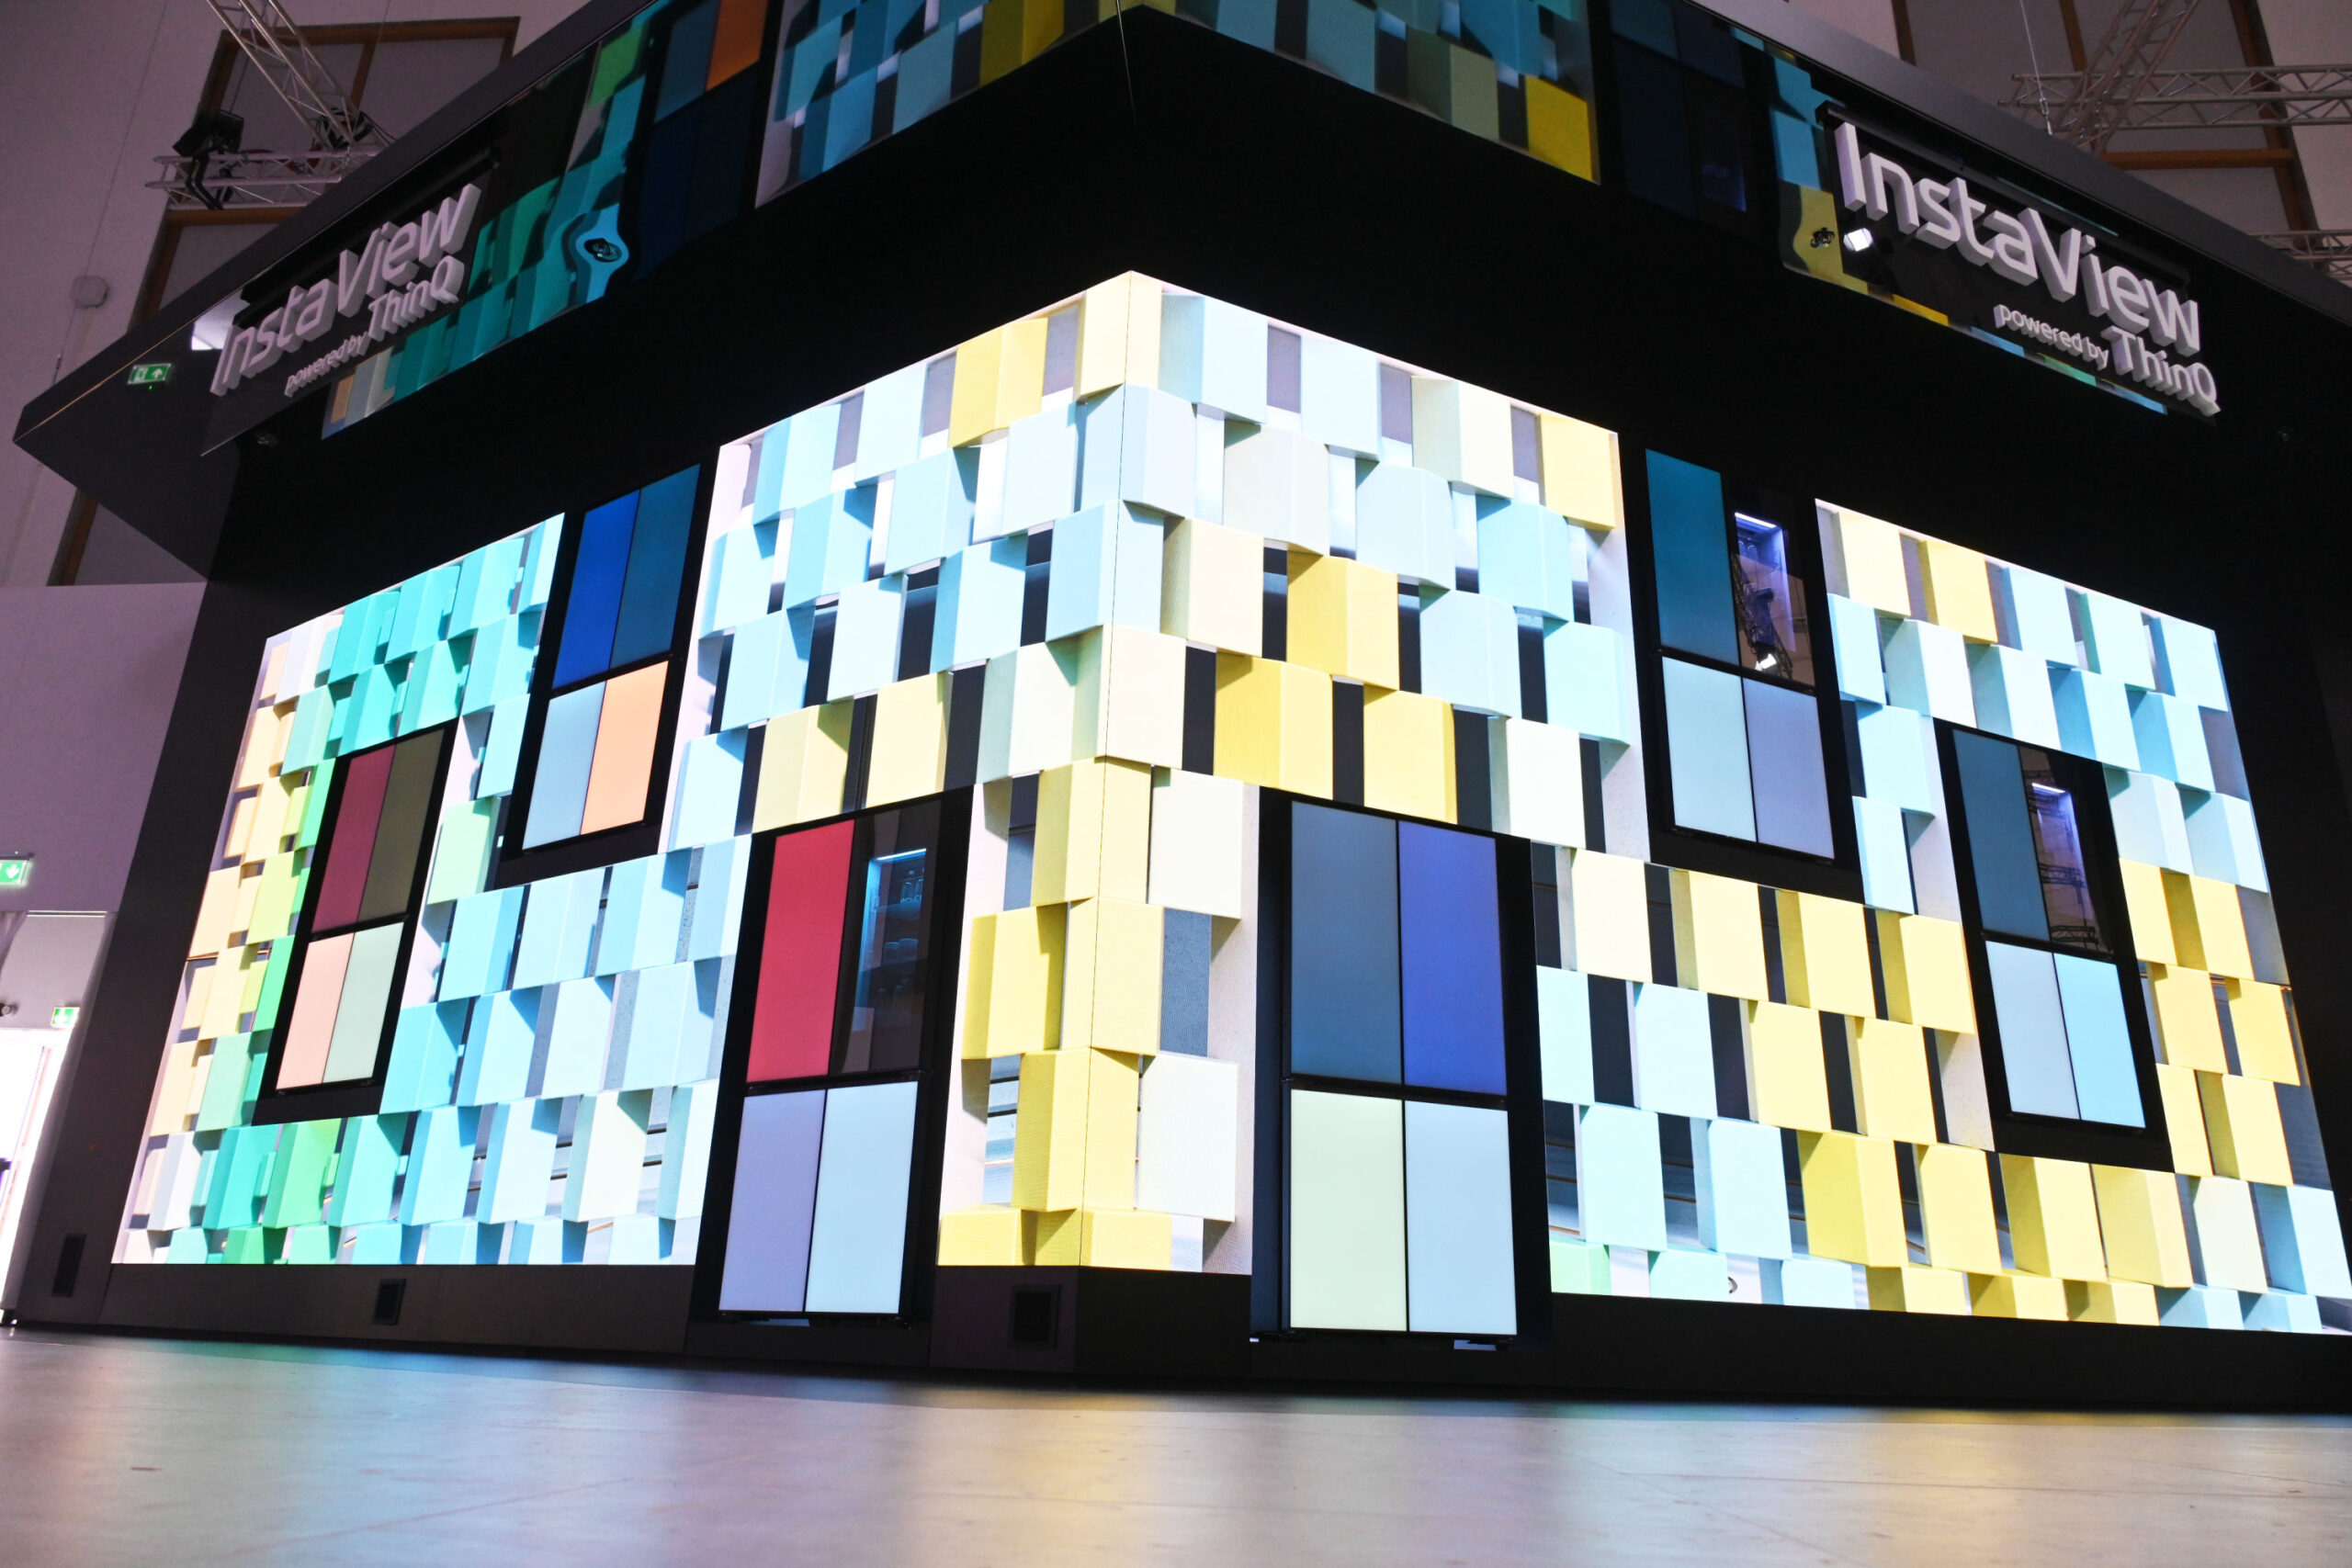 The LED wall modularizes the color-changing door panels of the LG MoodUP refrigerator at the MoodUP Innovation Zone during IFA 2022